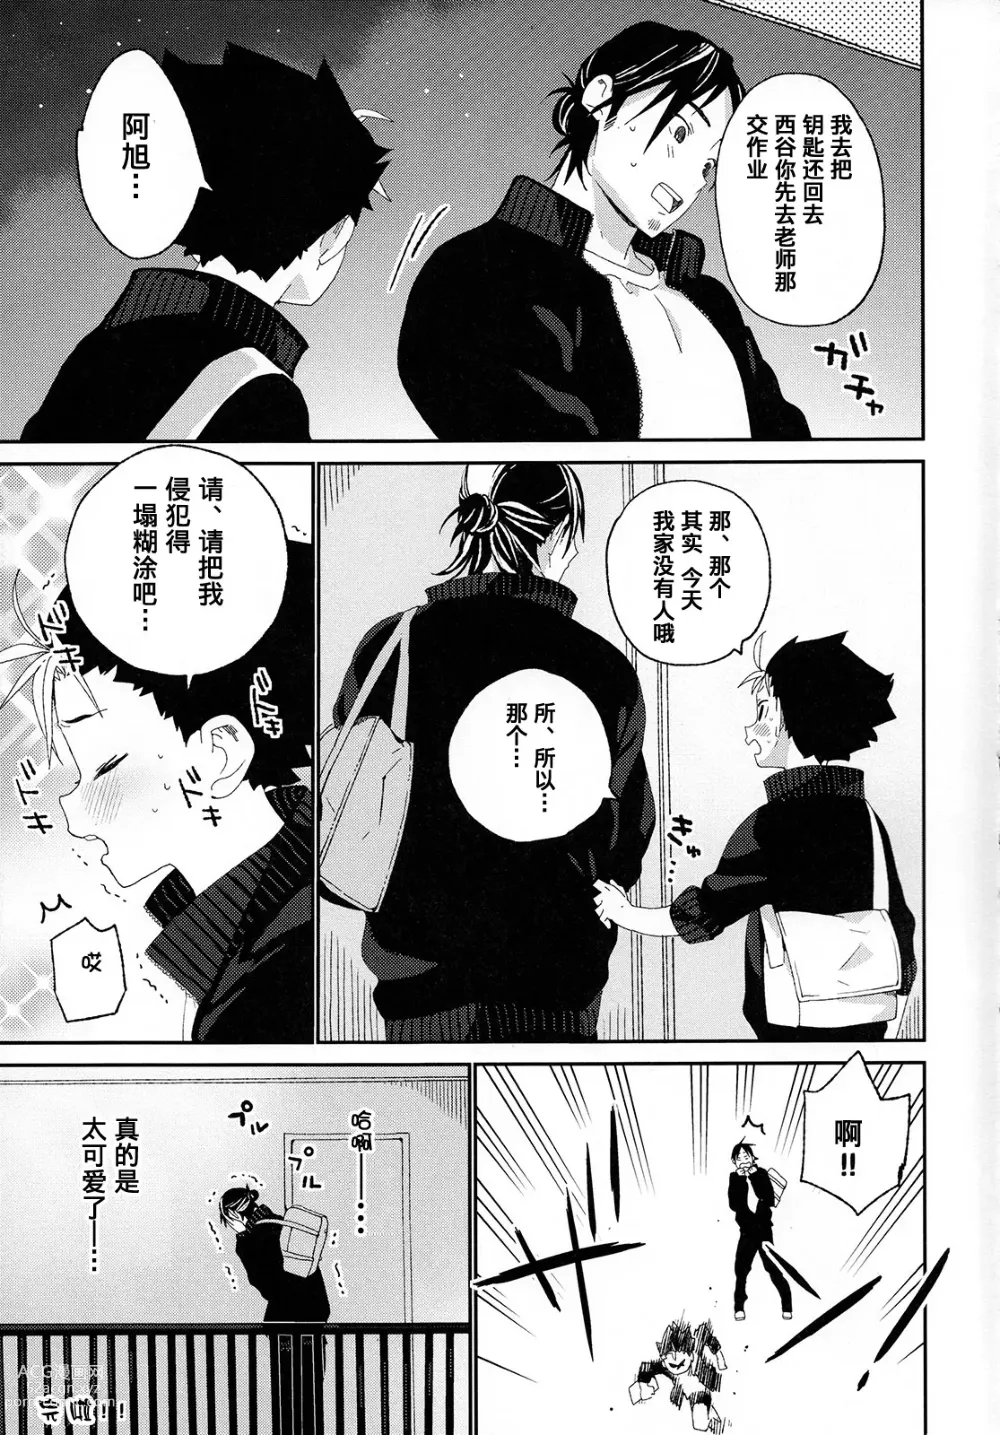 Page 39 of doujinshi 西谷君的发情期